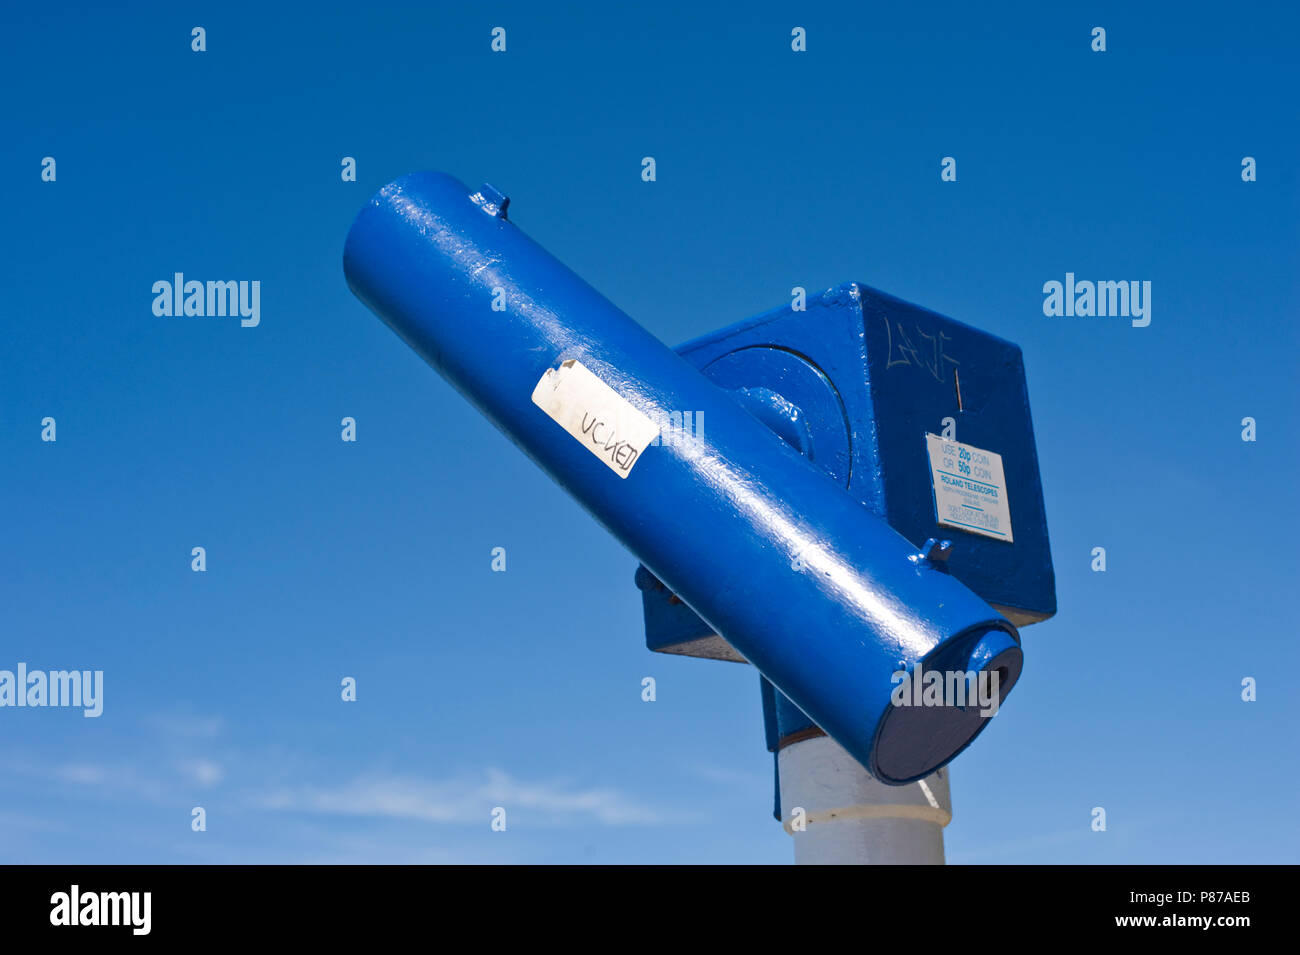 Blue tourist telescope against a blue sky on Plymouth Hoe in Plymouth Devon England UK Stock Photo